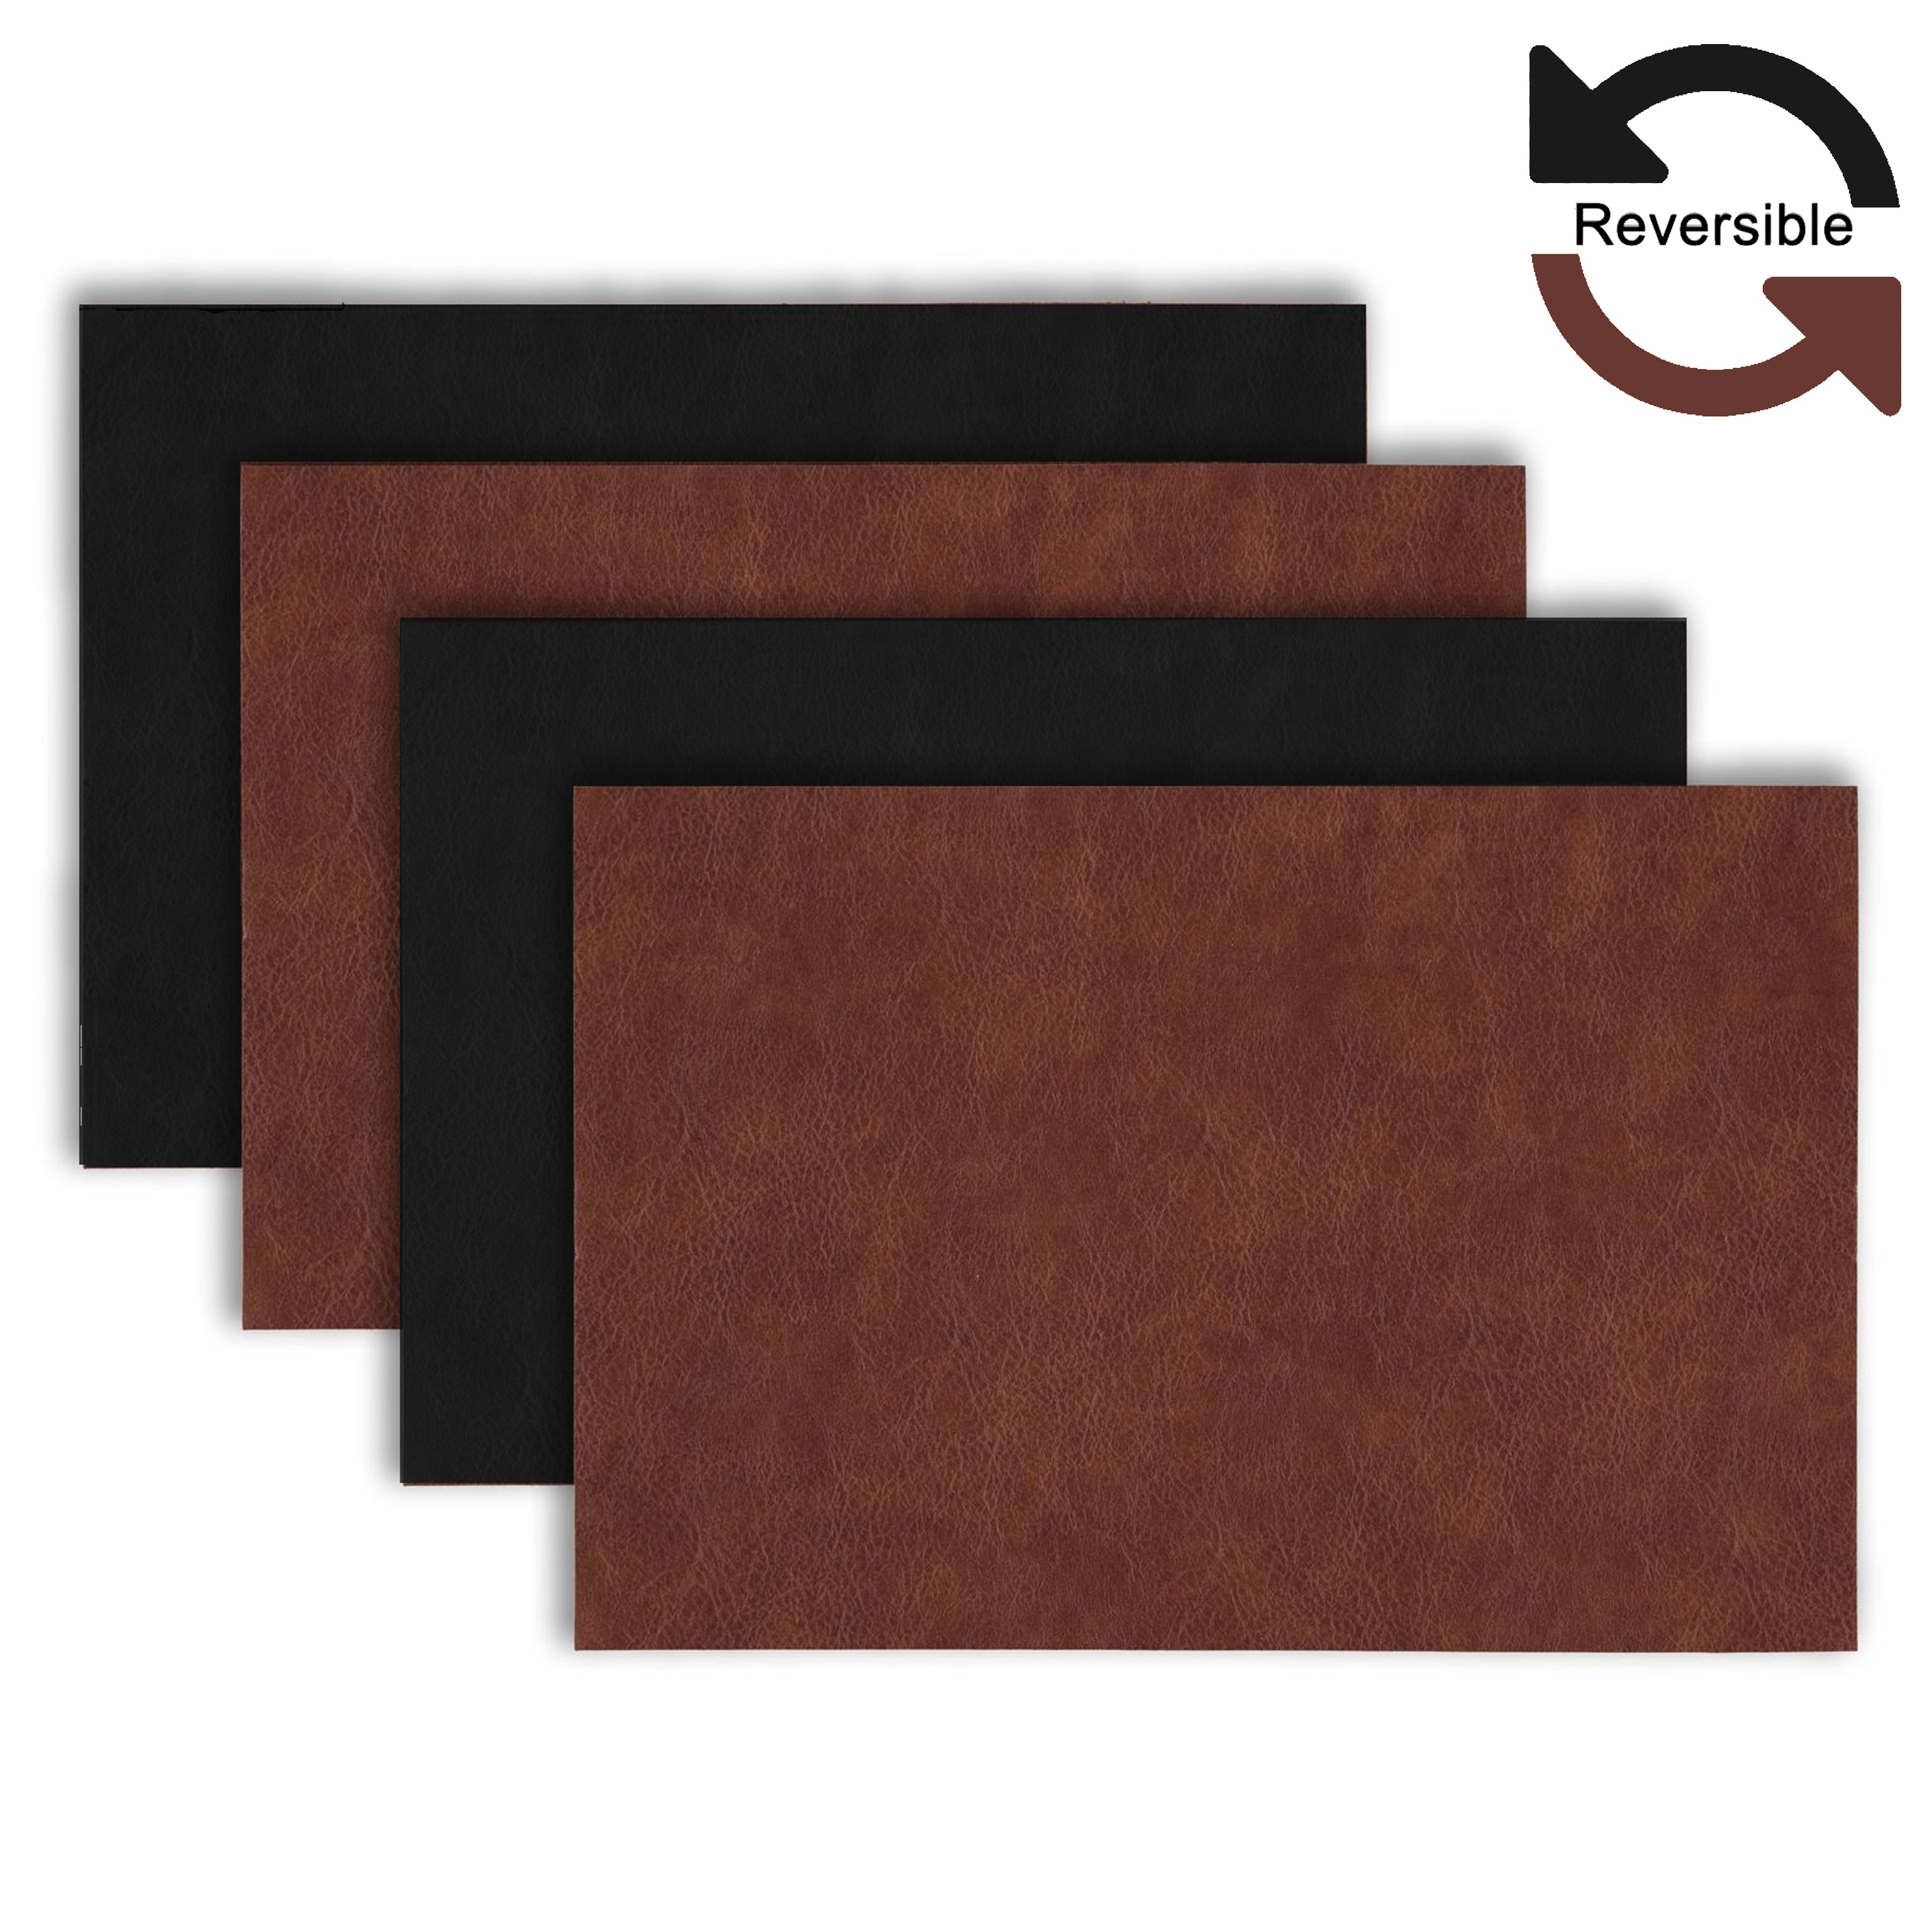 Dainty Home Florence Faux Leather Reversible 2 Color 12" x 18" Rectangular Placemat Set